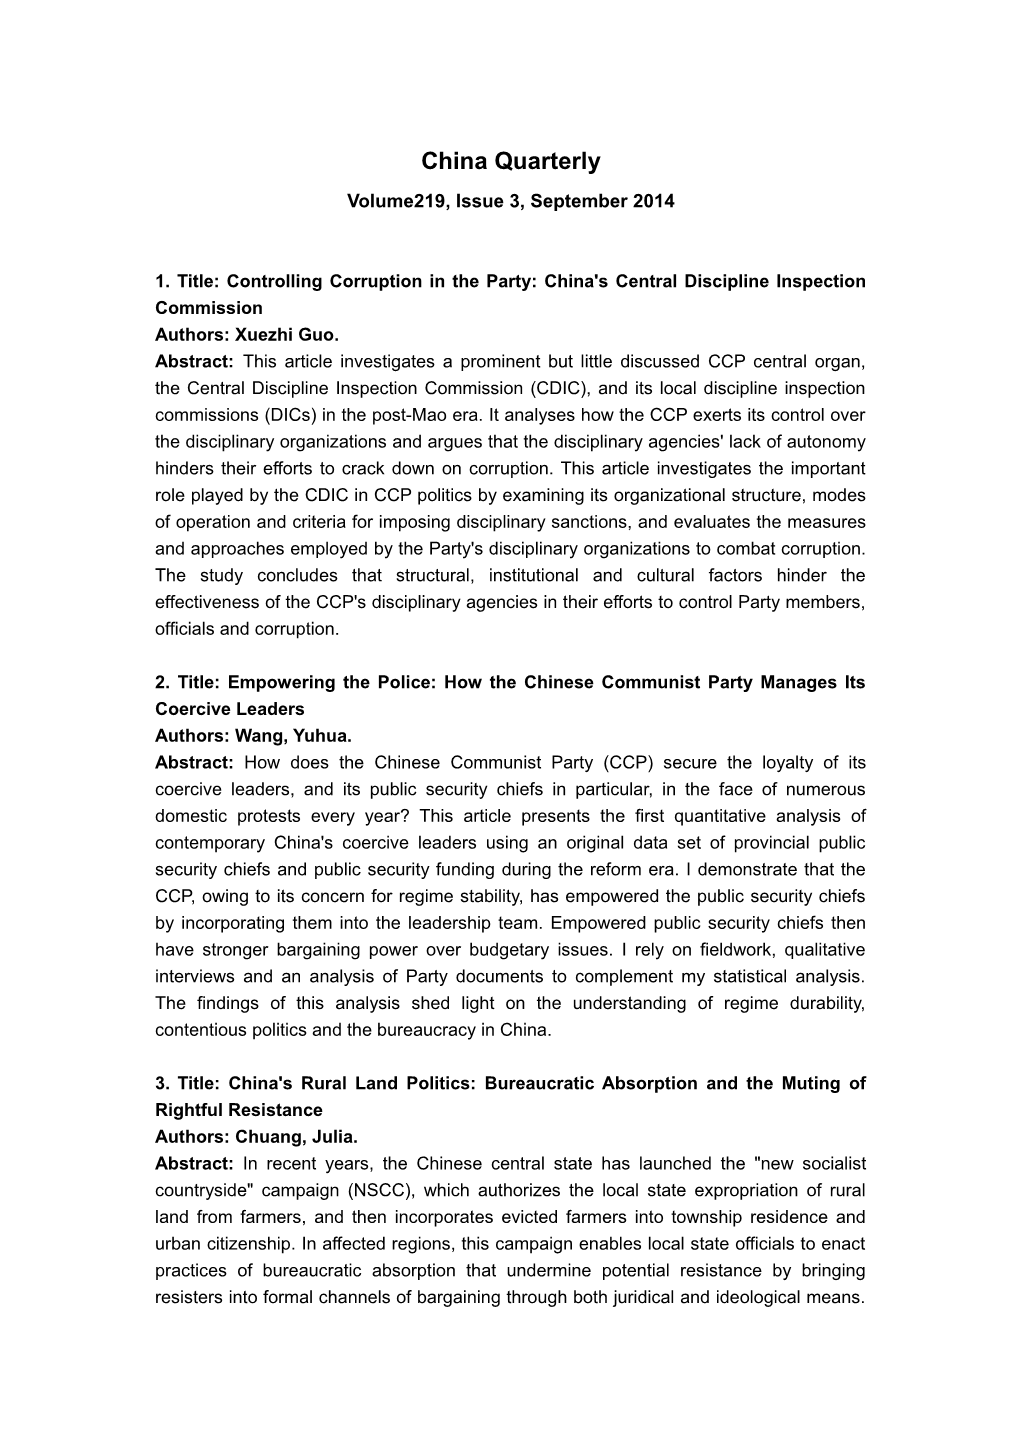 1. Title: Controlling Corruption in the Party: China's Central Discipline Inspection Commission